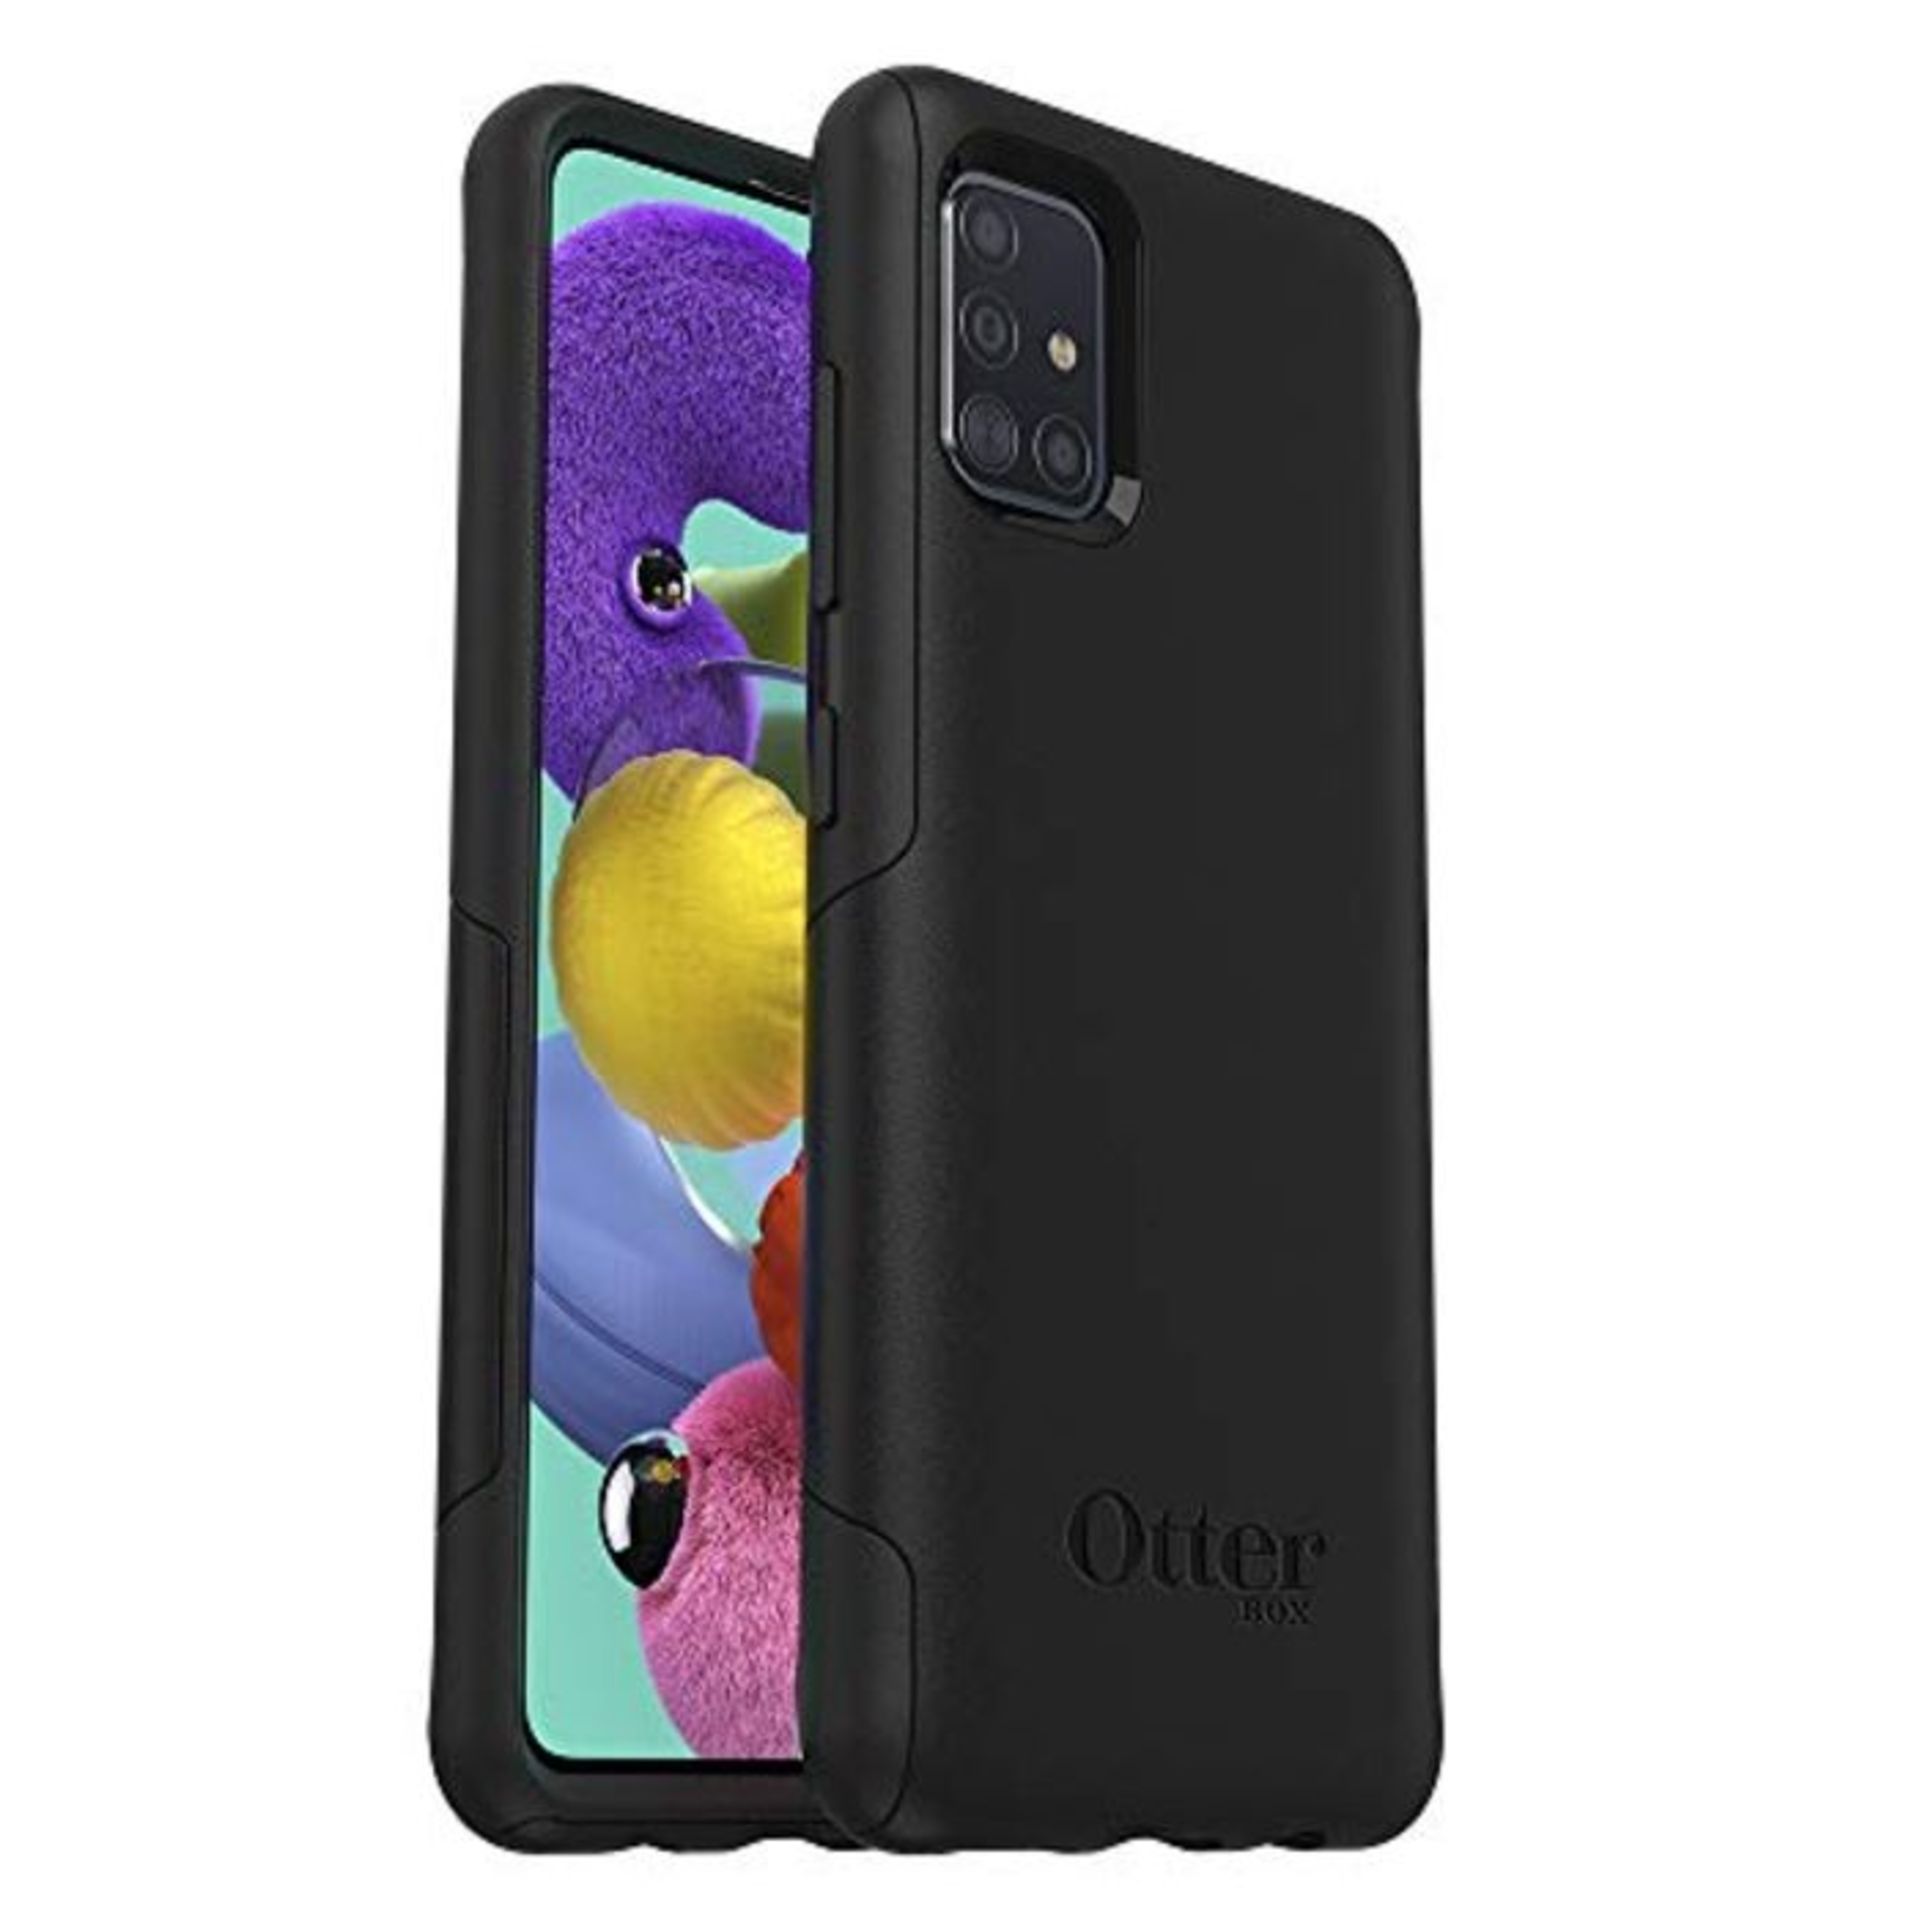 OtterBox 77-64872 for Galaxy A51, Drop Proof Protective Case, Commuter Lite, Black